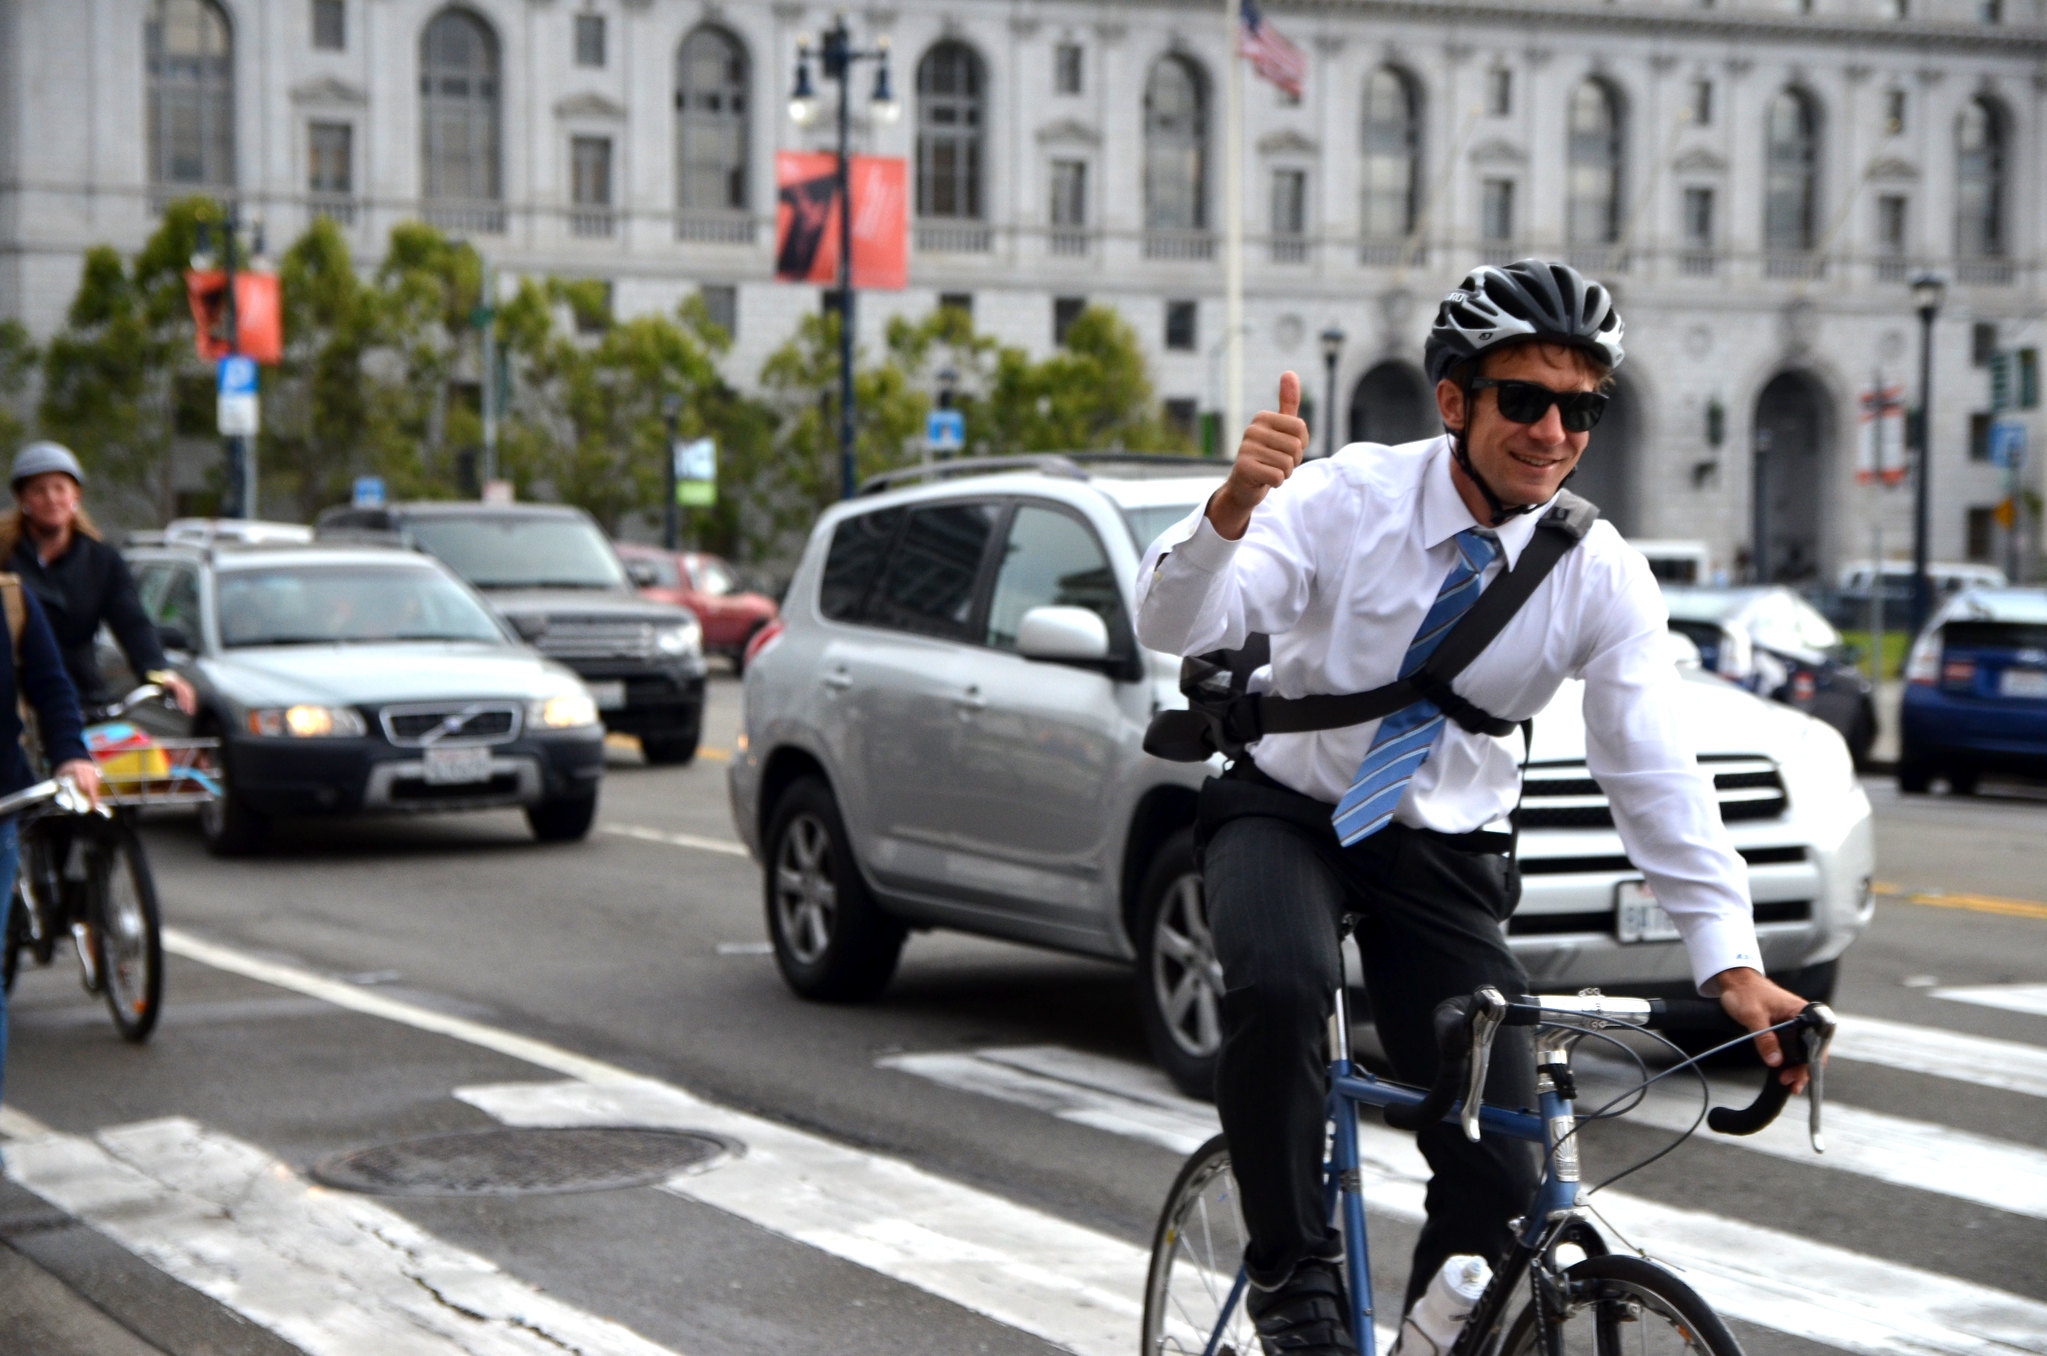 Op-Ed: This ‘Bike to Work’ Day, Let’s Pass Bold Policies To Support Cyclists